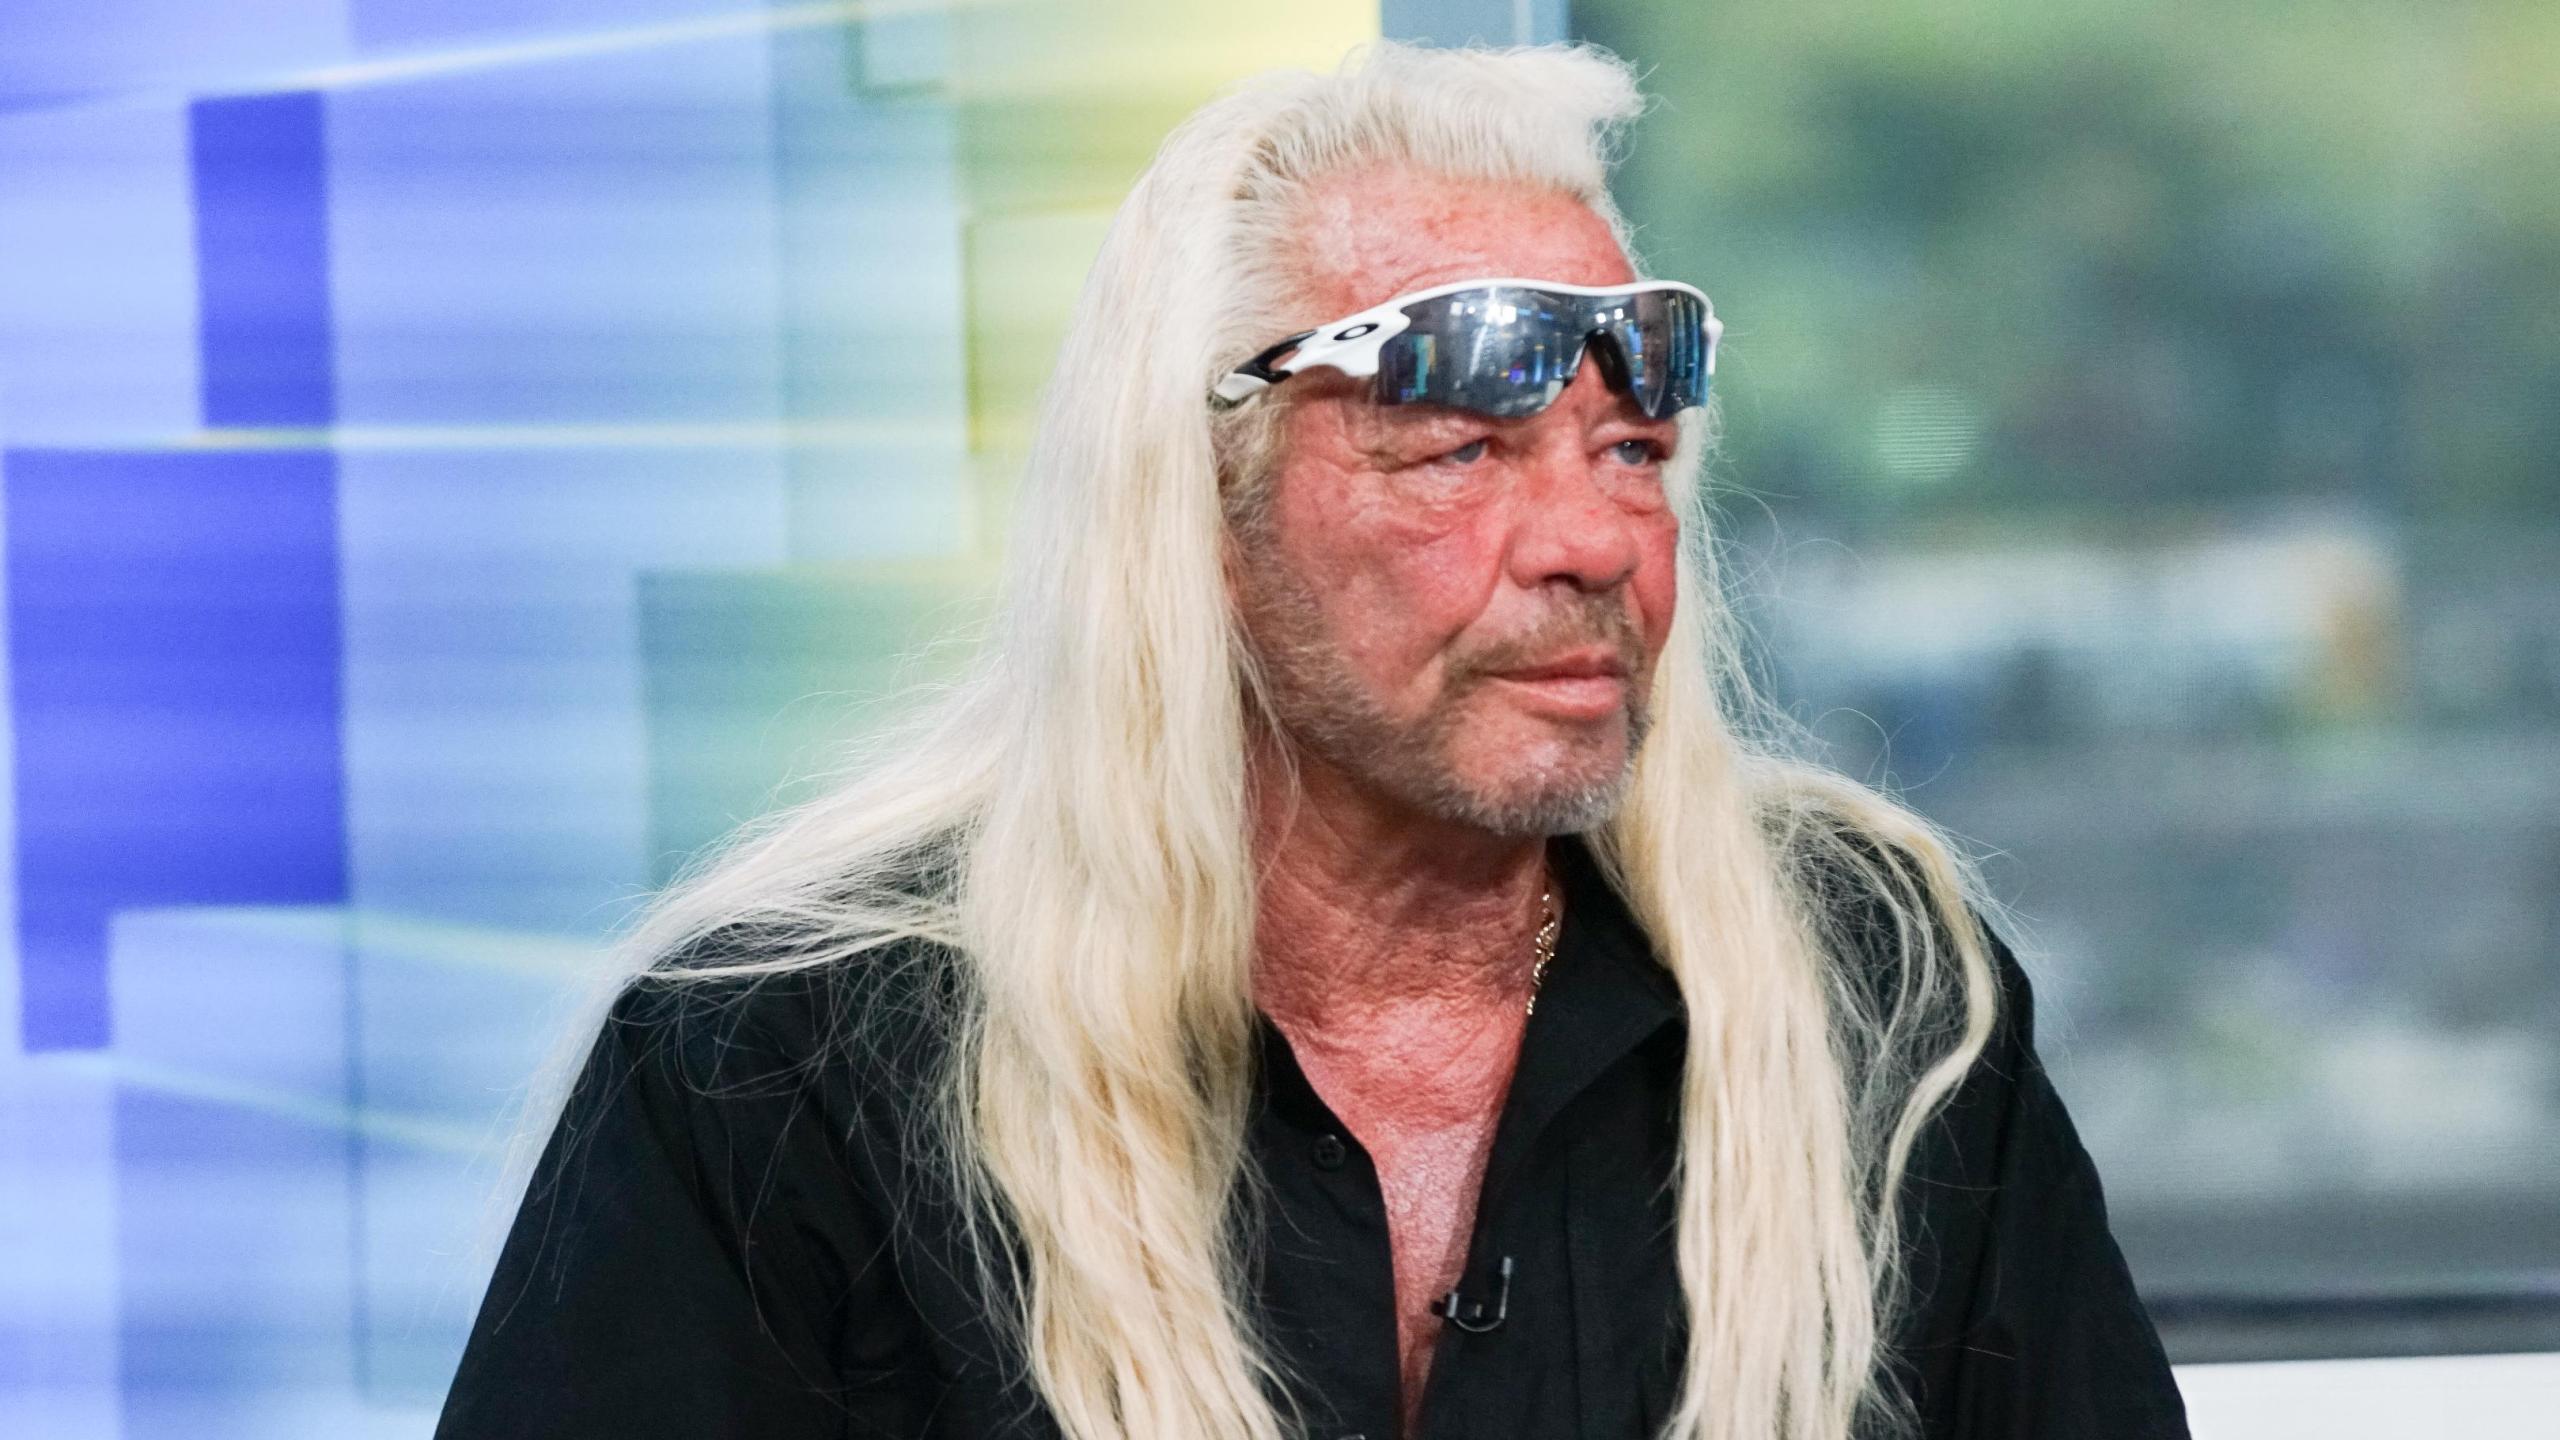 ‘Dog the Bounty Hunter’ Wants an Open Wedding with Fiancée Francie So That Anyone Can Attend